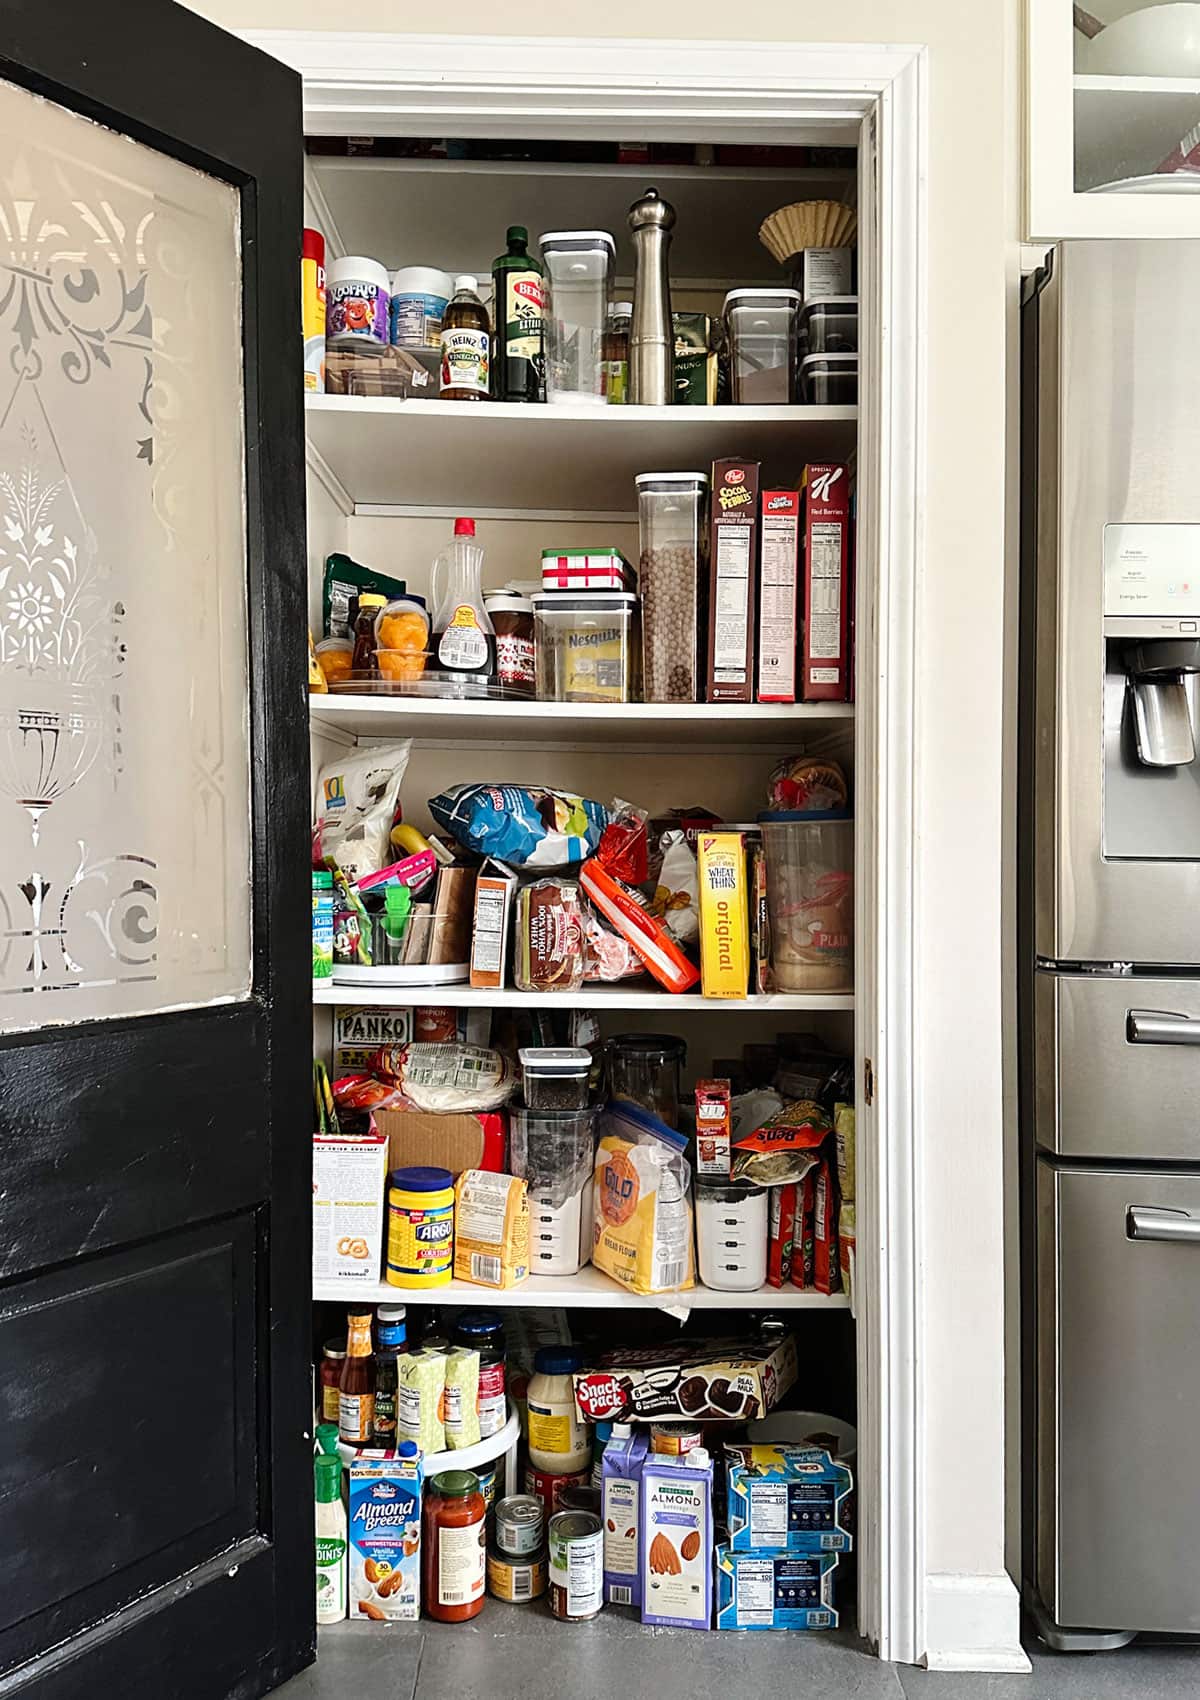 BEFORE Kitchen Pantry Organization - Giving my kitchen pantry a refresh with clever organization ideas and storage bins